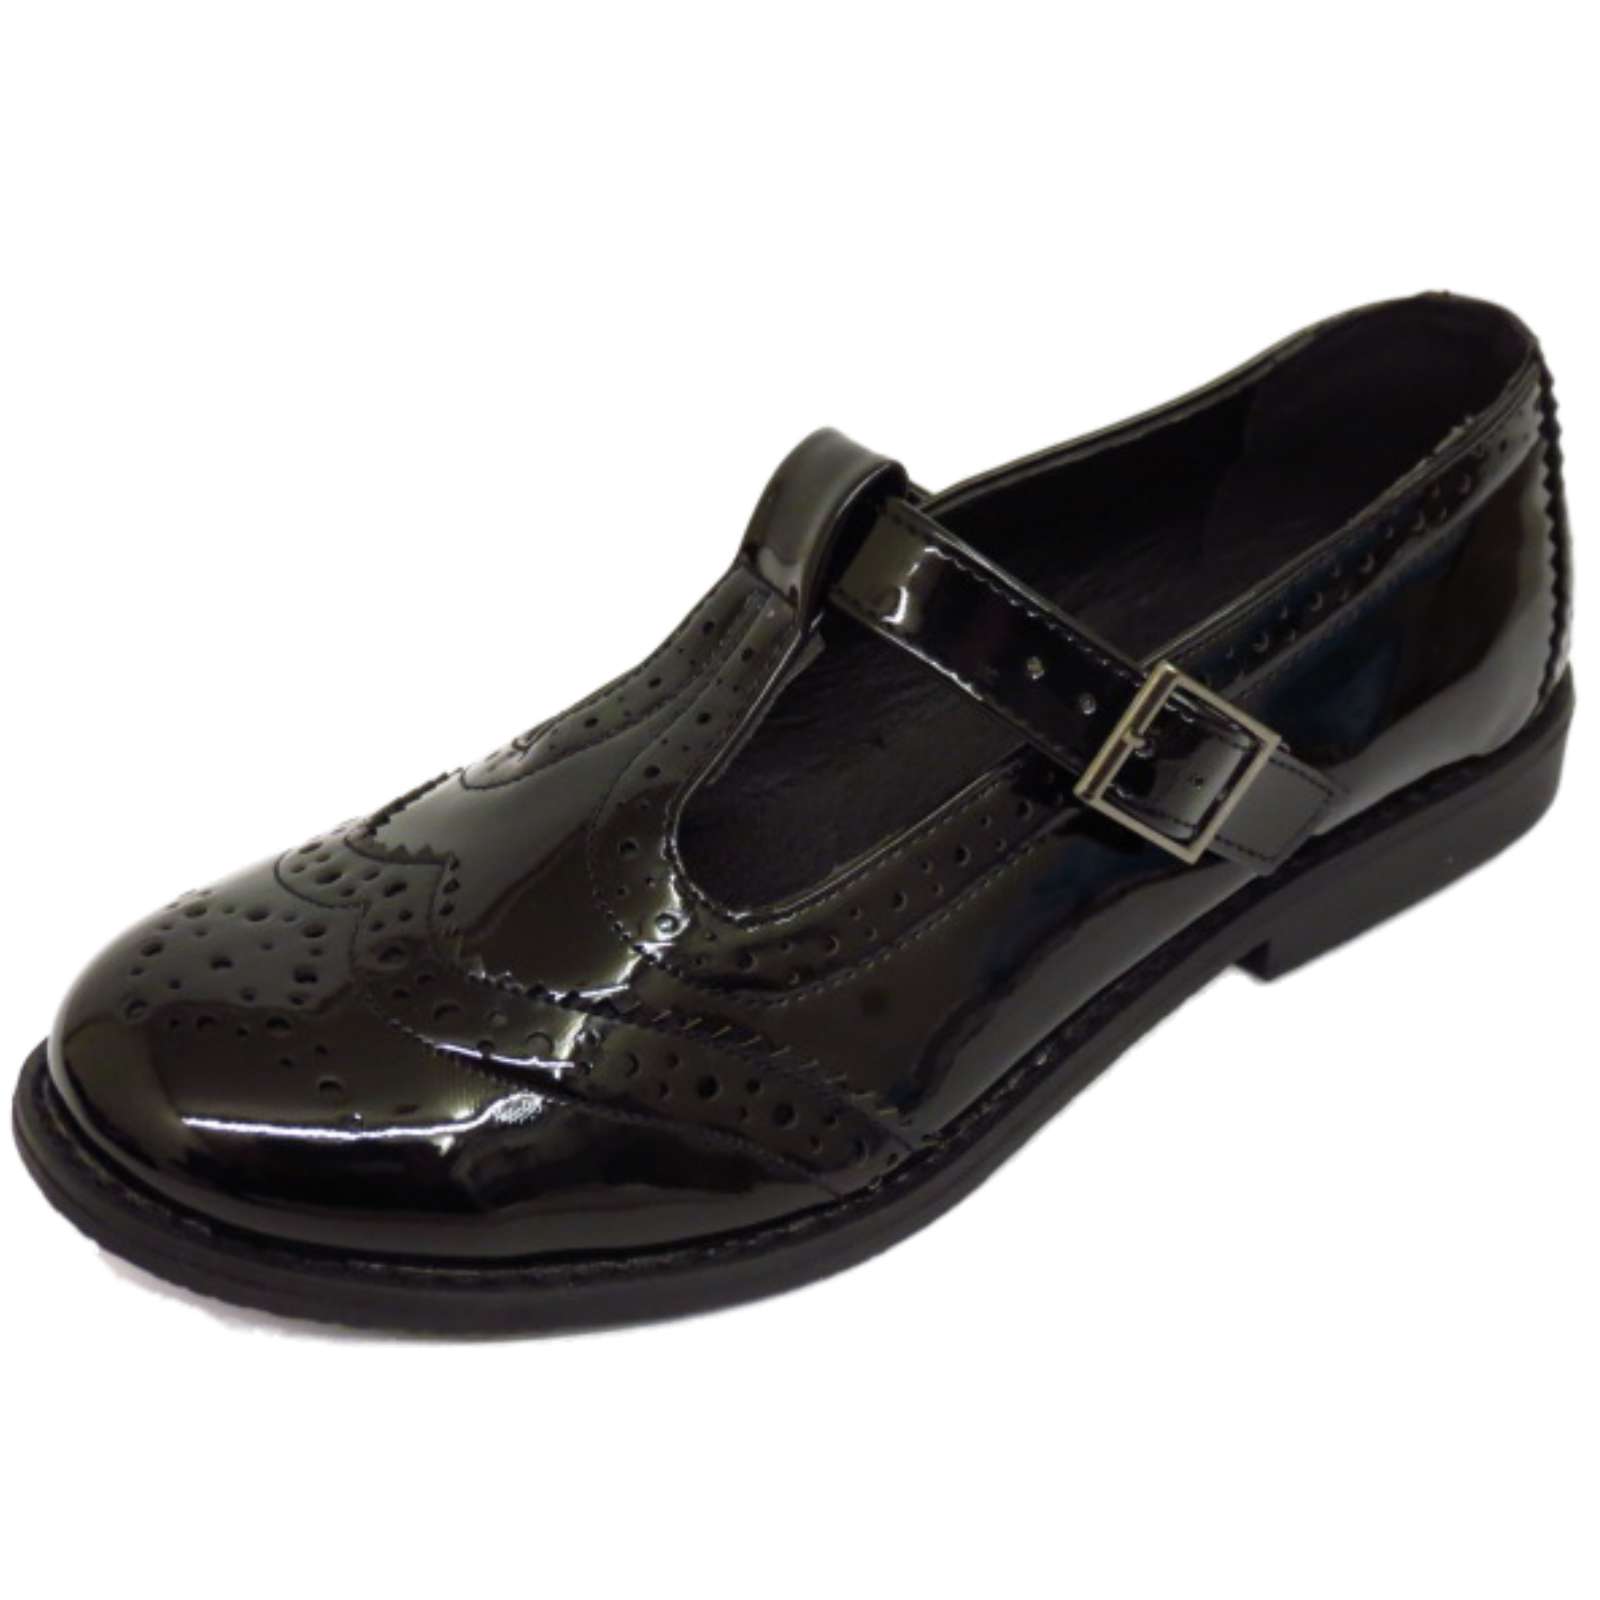 flat work shoes